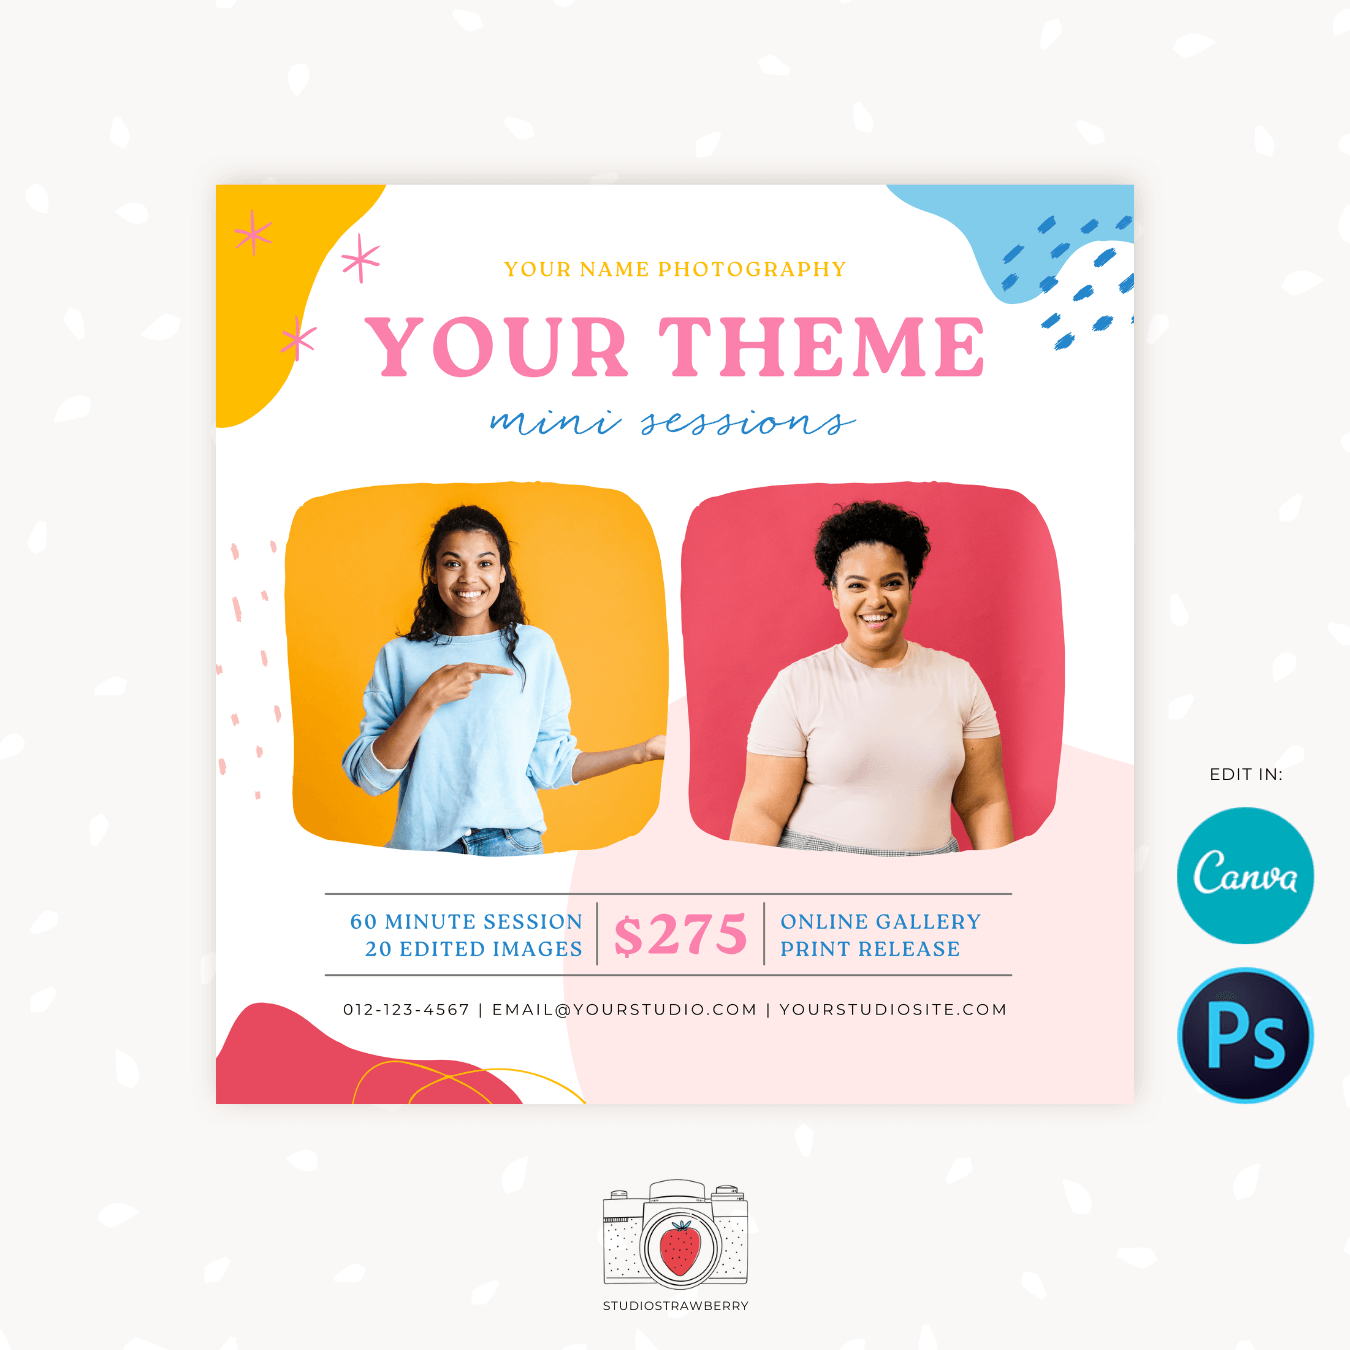 Colorful creative photography marketing template mini sessions